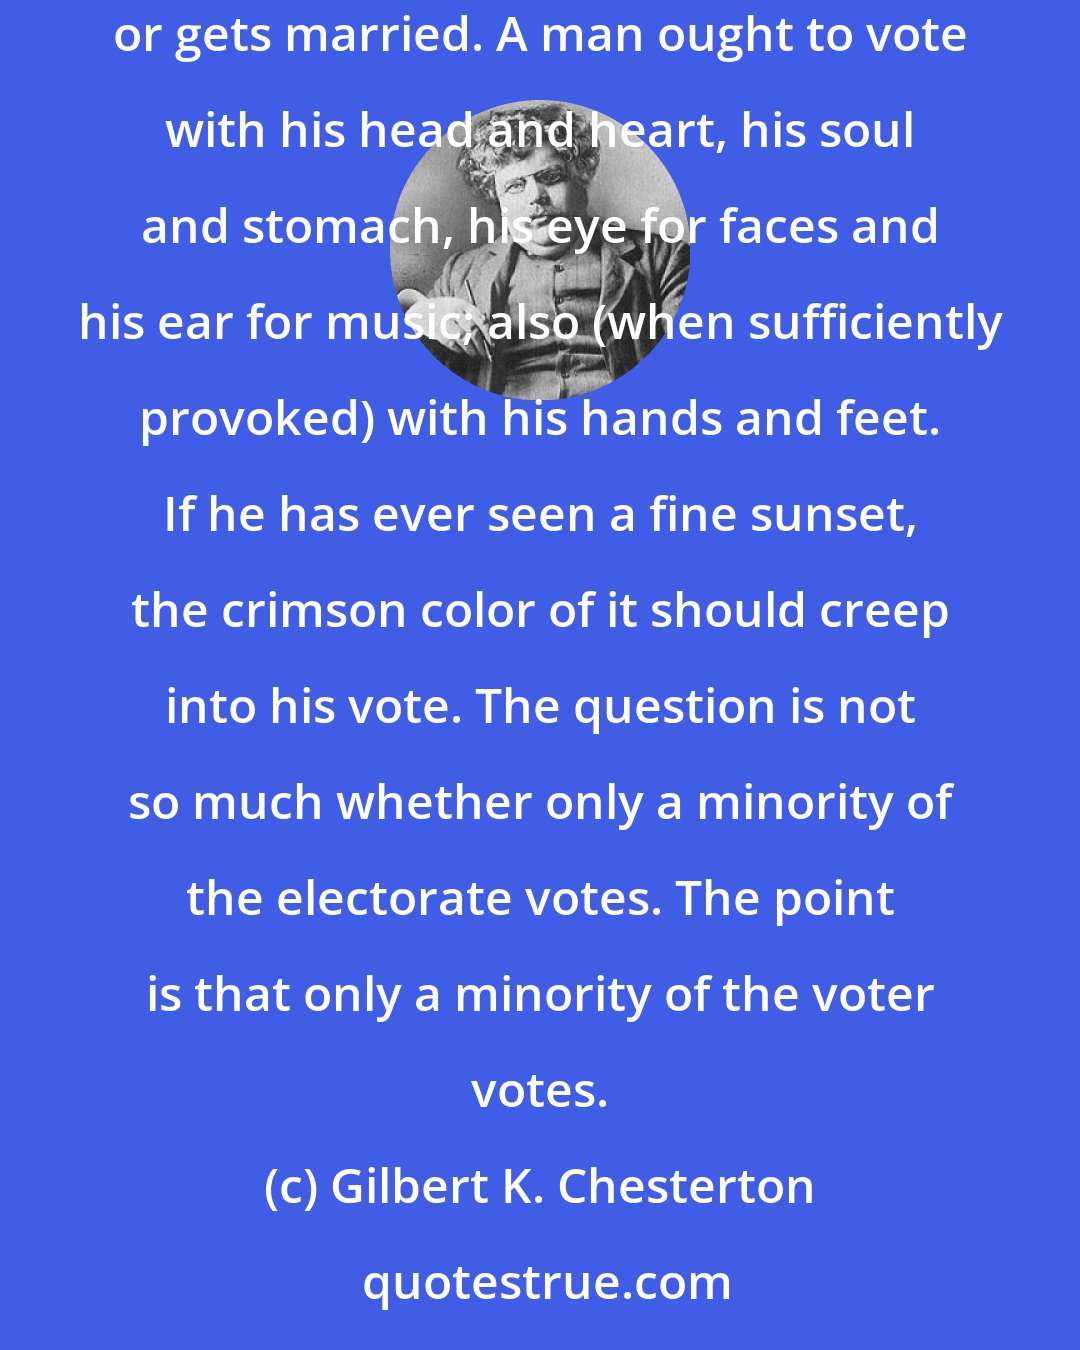 Gilbert K. Chesterton: The average man votes below himself; he votes with half a mind or a hundredth part of one. A man ought to vote with the whole of himself, as he worships or gets married. A man ought to vote with his head and heart, his soul and stomach, his eye for faces and his ear for music; also (when sufficiently provoked) with his hands and feet. If he has ever seen a fine sunset, the crimson color of it should creep into his vote. The question is not so much whether only a minority of the electorate votes. The point is that only a minority of the voter votes.